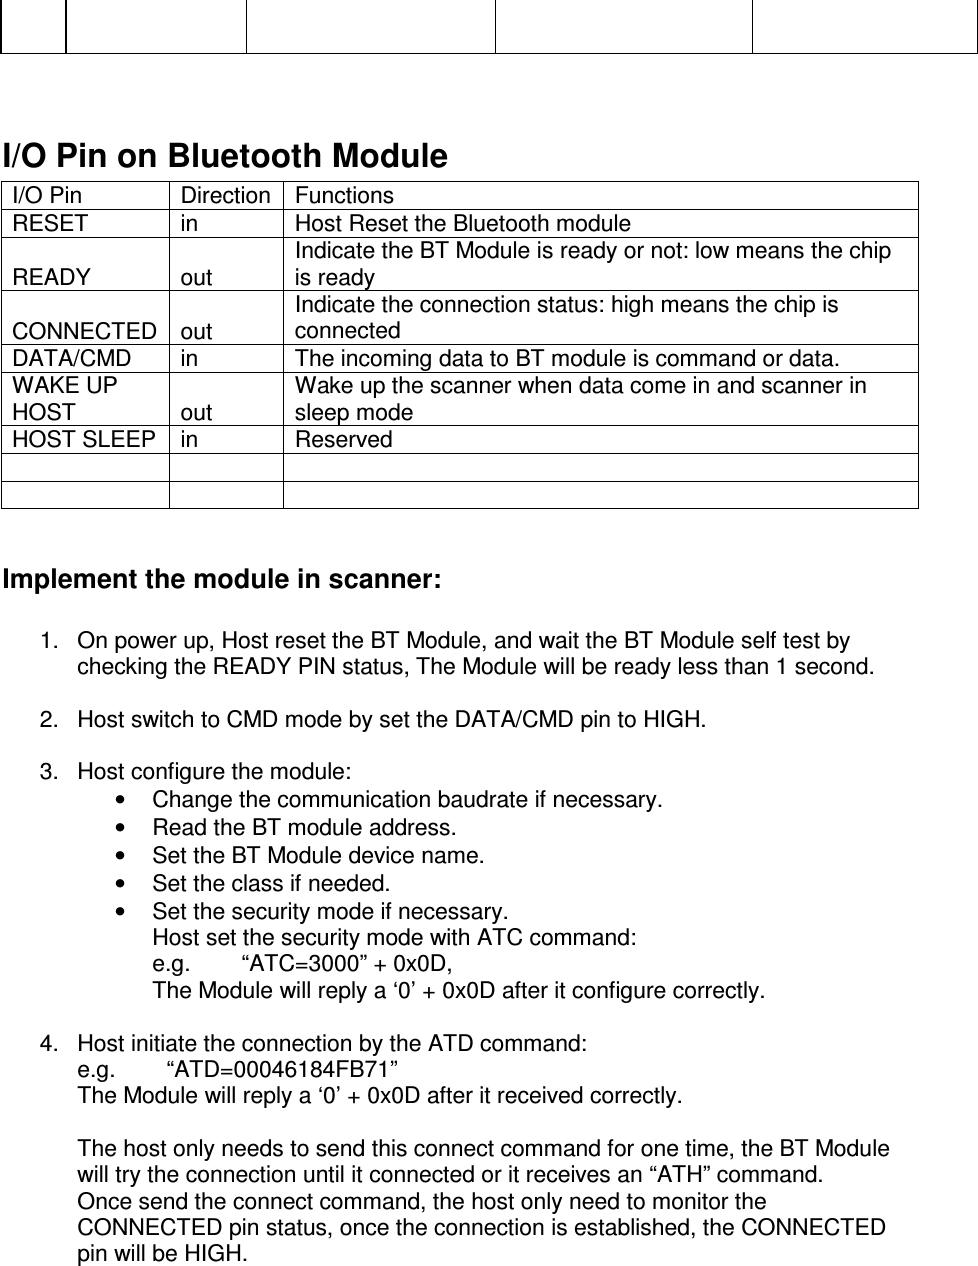             I/O Pin on Bluetooth Module I/O Pin  Direction Functions RESET  in  Host Reset the Bluetooth module READY  out Indicate the BT Module is ready or not: low means the chip is ready CONNECTED out Indicate the connection status: high means the chip is connected DATA/CMD  in  The incoming data to BT module is command or data. WAKE UP HOST  out Wake up the scanner when data come in and scanner in sleep mode HOST SLEEP  in  Reserved            Implement the module in scanner:  1.  On power up, Host reset the BT Module, and wait the BT Module self test by checking the READY PIN status, The Module will be ready less than 1 second.  2.  Host switch to CMD mode by set the DATA/CMD pin to HIGH.  3.  Host configure the module: •  Change the communication baudrate if necessary. •  Read the BT module address. •  Set the BT Module device name. •  Set the class if needed. •  Set the security mode if necessary. Host set the security mode with ATC command: e.g.        “ATC=3000” + 0x0D,  The Module will reply a ‘0’ + 0x0D after it configure correctly.  4.  Host initiate the connection by the ATD command: e.g.        “ATD=00046184FB71” The Module will reply a ‘0’ + 0x0D after it received correctly.  The host only needs to send this connect command for one time, the BT Module will try the connection until it connected or it receives an “ATH” command. Once send the connect command, the host only need to monitor the CONNECTED pin status, once the connection is established, the CONNECTED pin will be HIGH.  